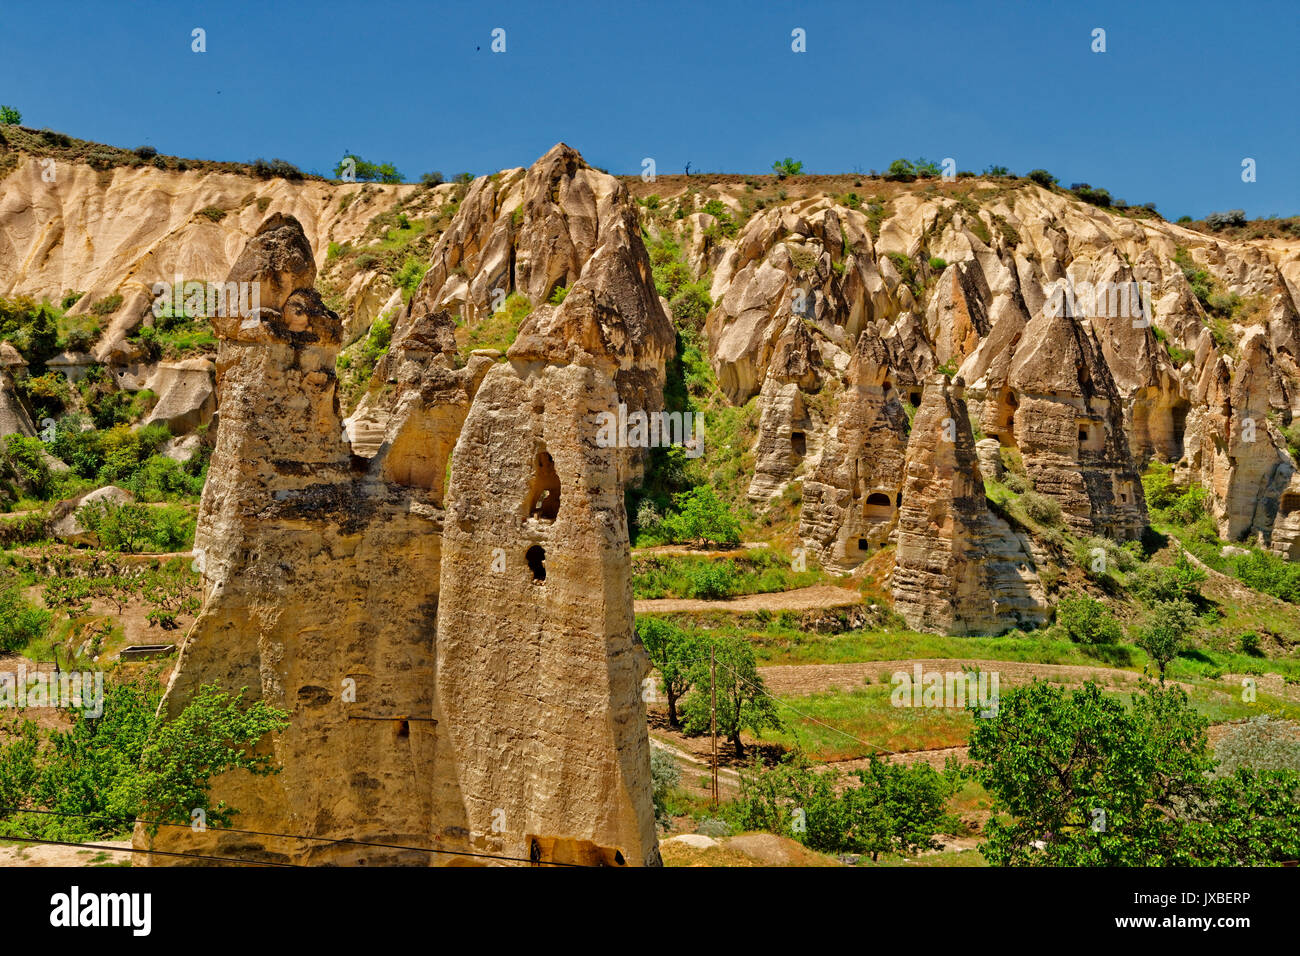 Cave dwellings and fairy chimneys at Goreme National Park, Cappadocia, Turkey Stock Photo